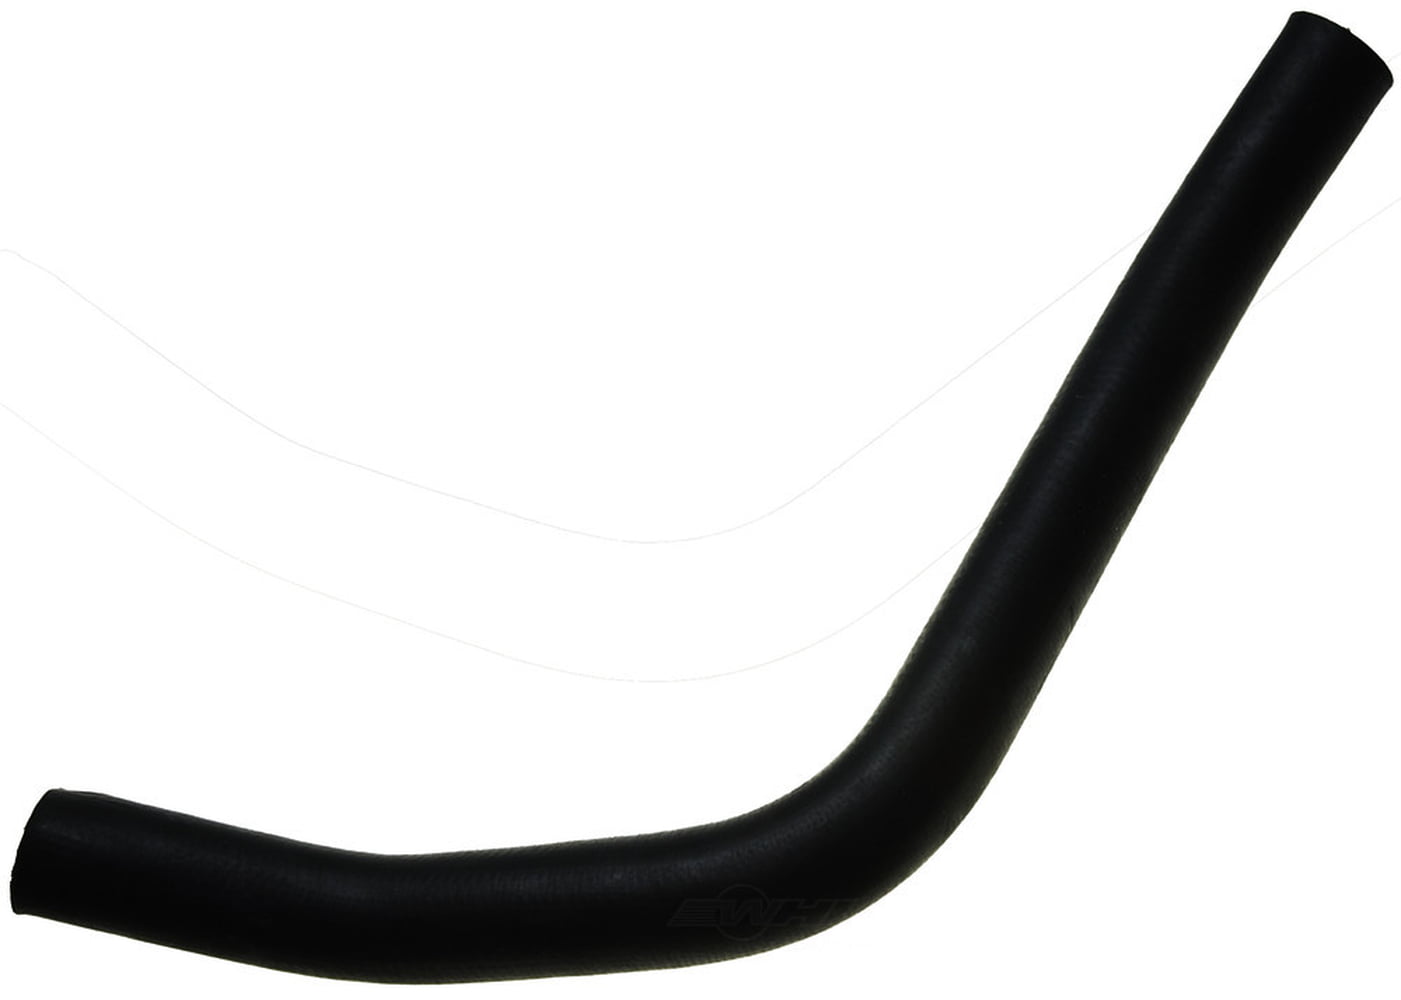 Mishimoto MMHOSE-GM-14L Lower Radiator Hose Compatible With Chevrolet Chevelle 396ci 1965-1967 Black